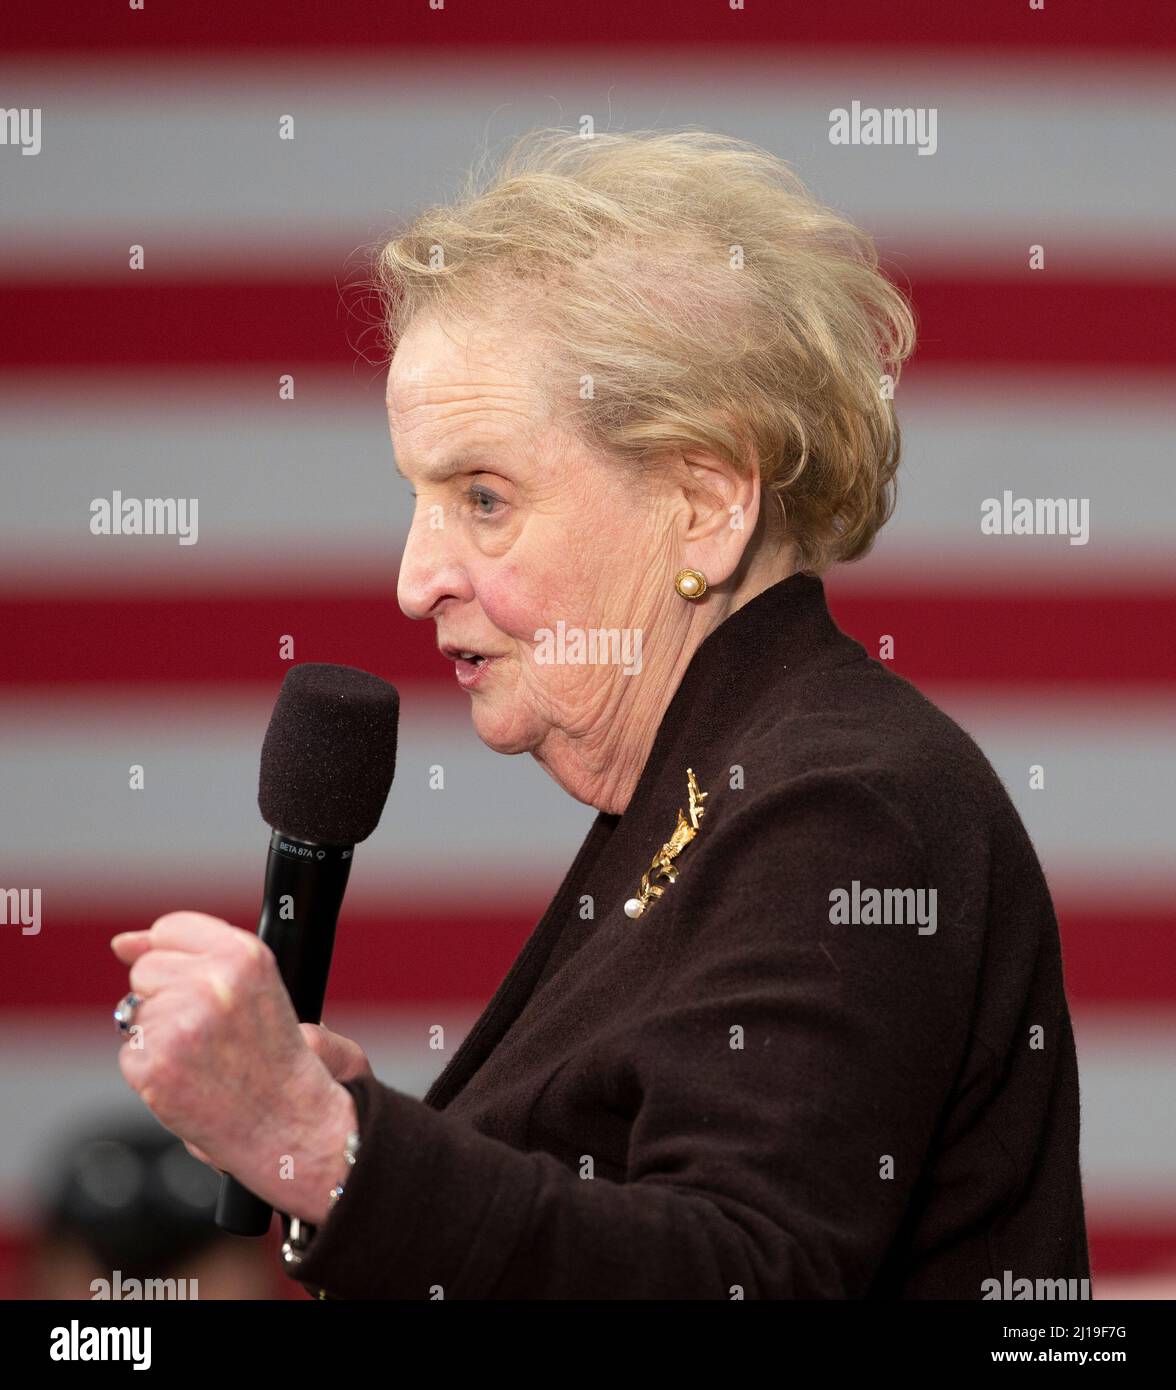 February 6, 2016, Concord, New Hampshire, USA: Former U.S. Secretary of State Madeline Albright campaigns for U.S. Democratic presidential candidate Hillary Clinton at a campaign rally in Concord, New Hampshire on February 6, 2016. Albright dies at age 84 on March 23, 2022. Credit: Keiko Hiromi/AFLO/Alamy Live News Stock Photo